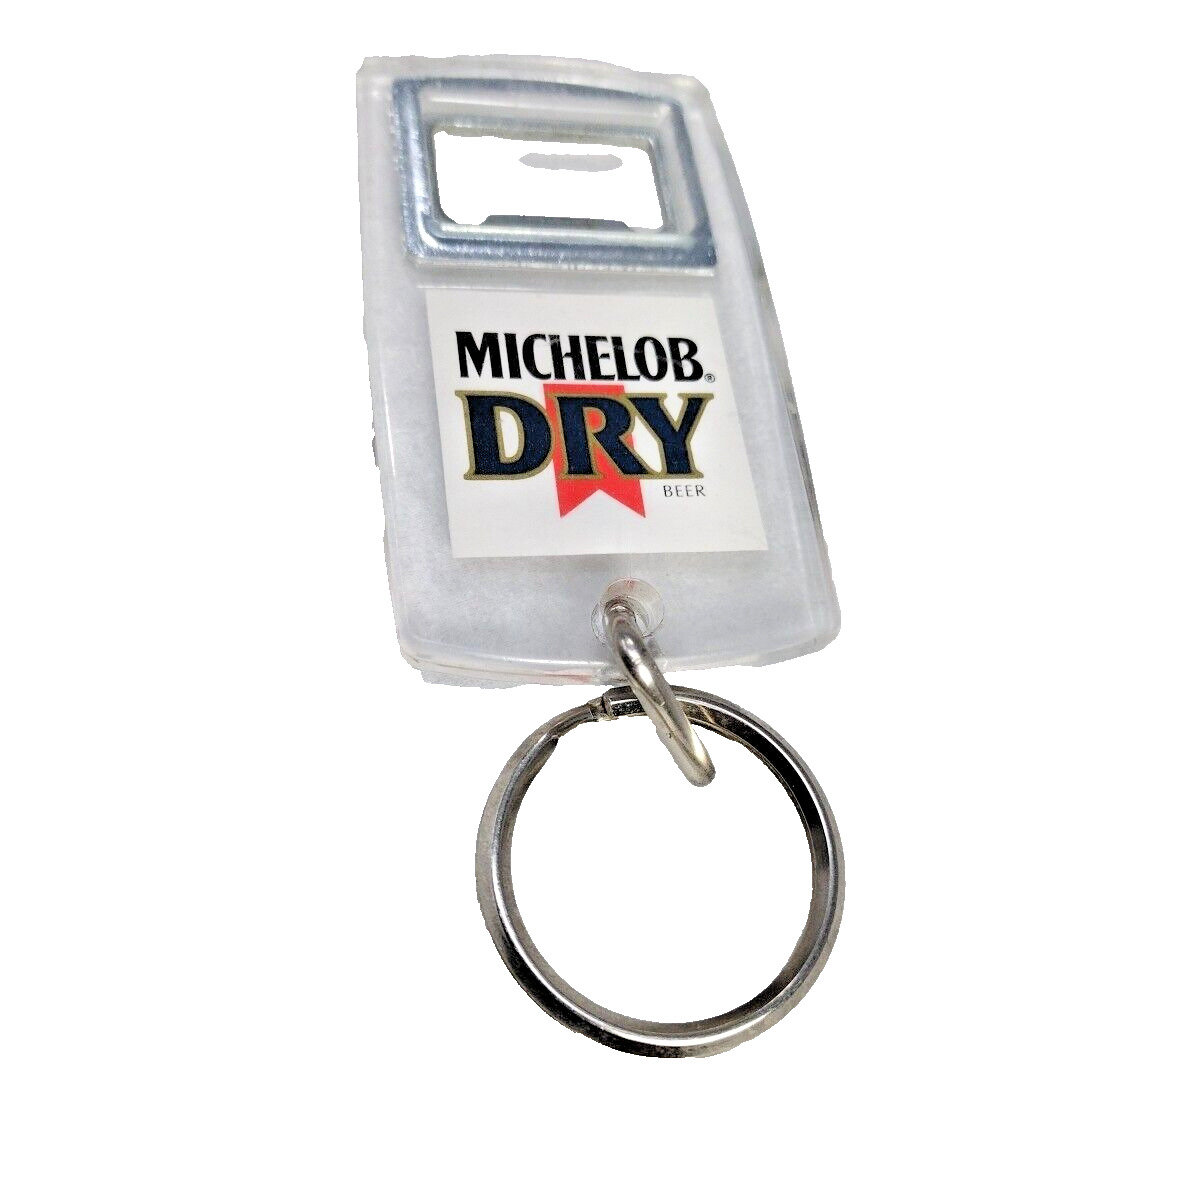 Michelob DRY Beer Lucite Key Chain Bottle Opener